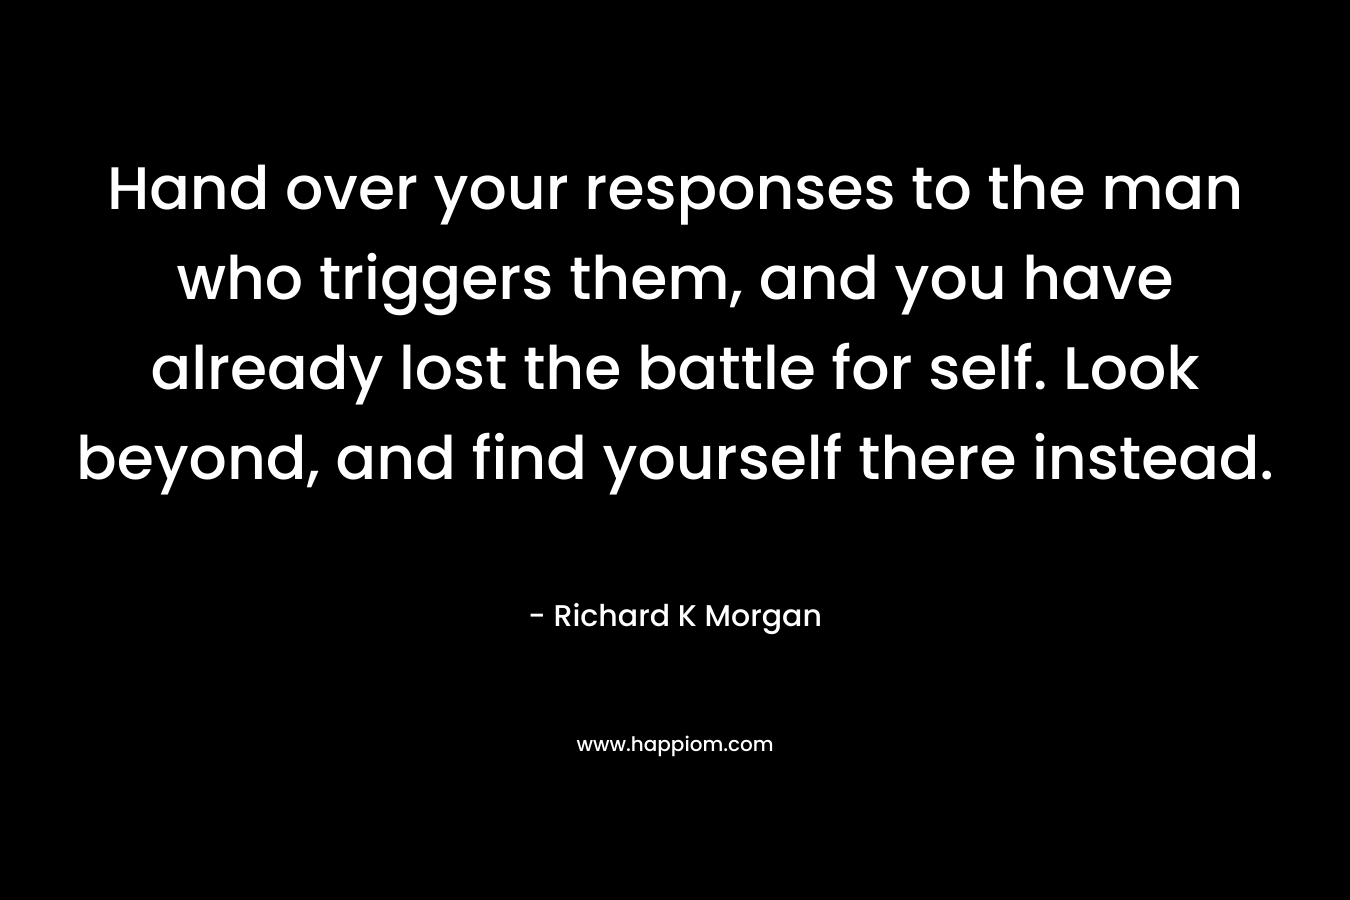 Hand over your responses to the man who triggers them, and you have already lost the battle for self. Look beyond, and find yourself there instead. – Richard K Morgan